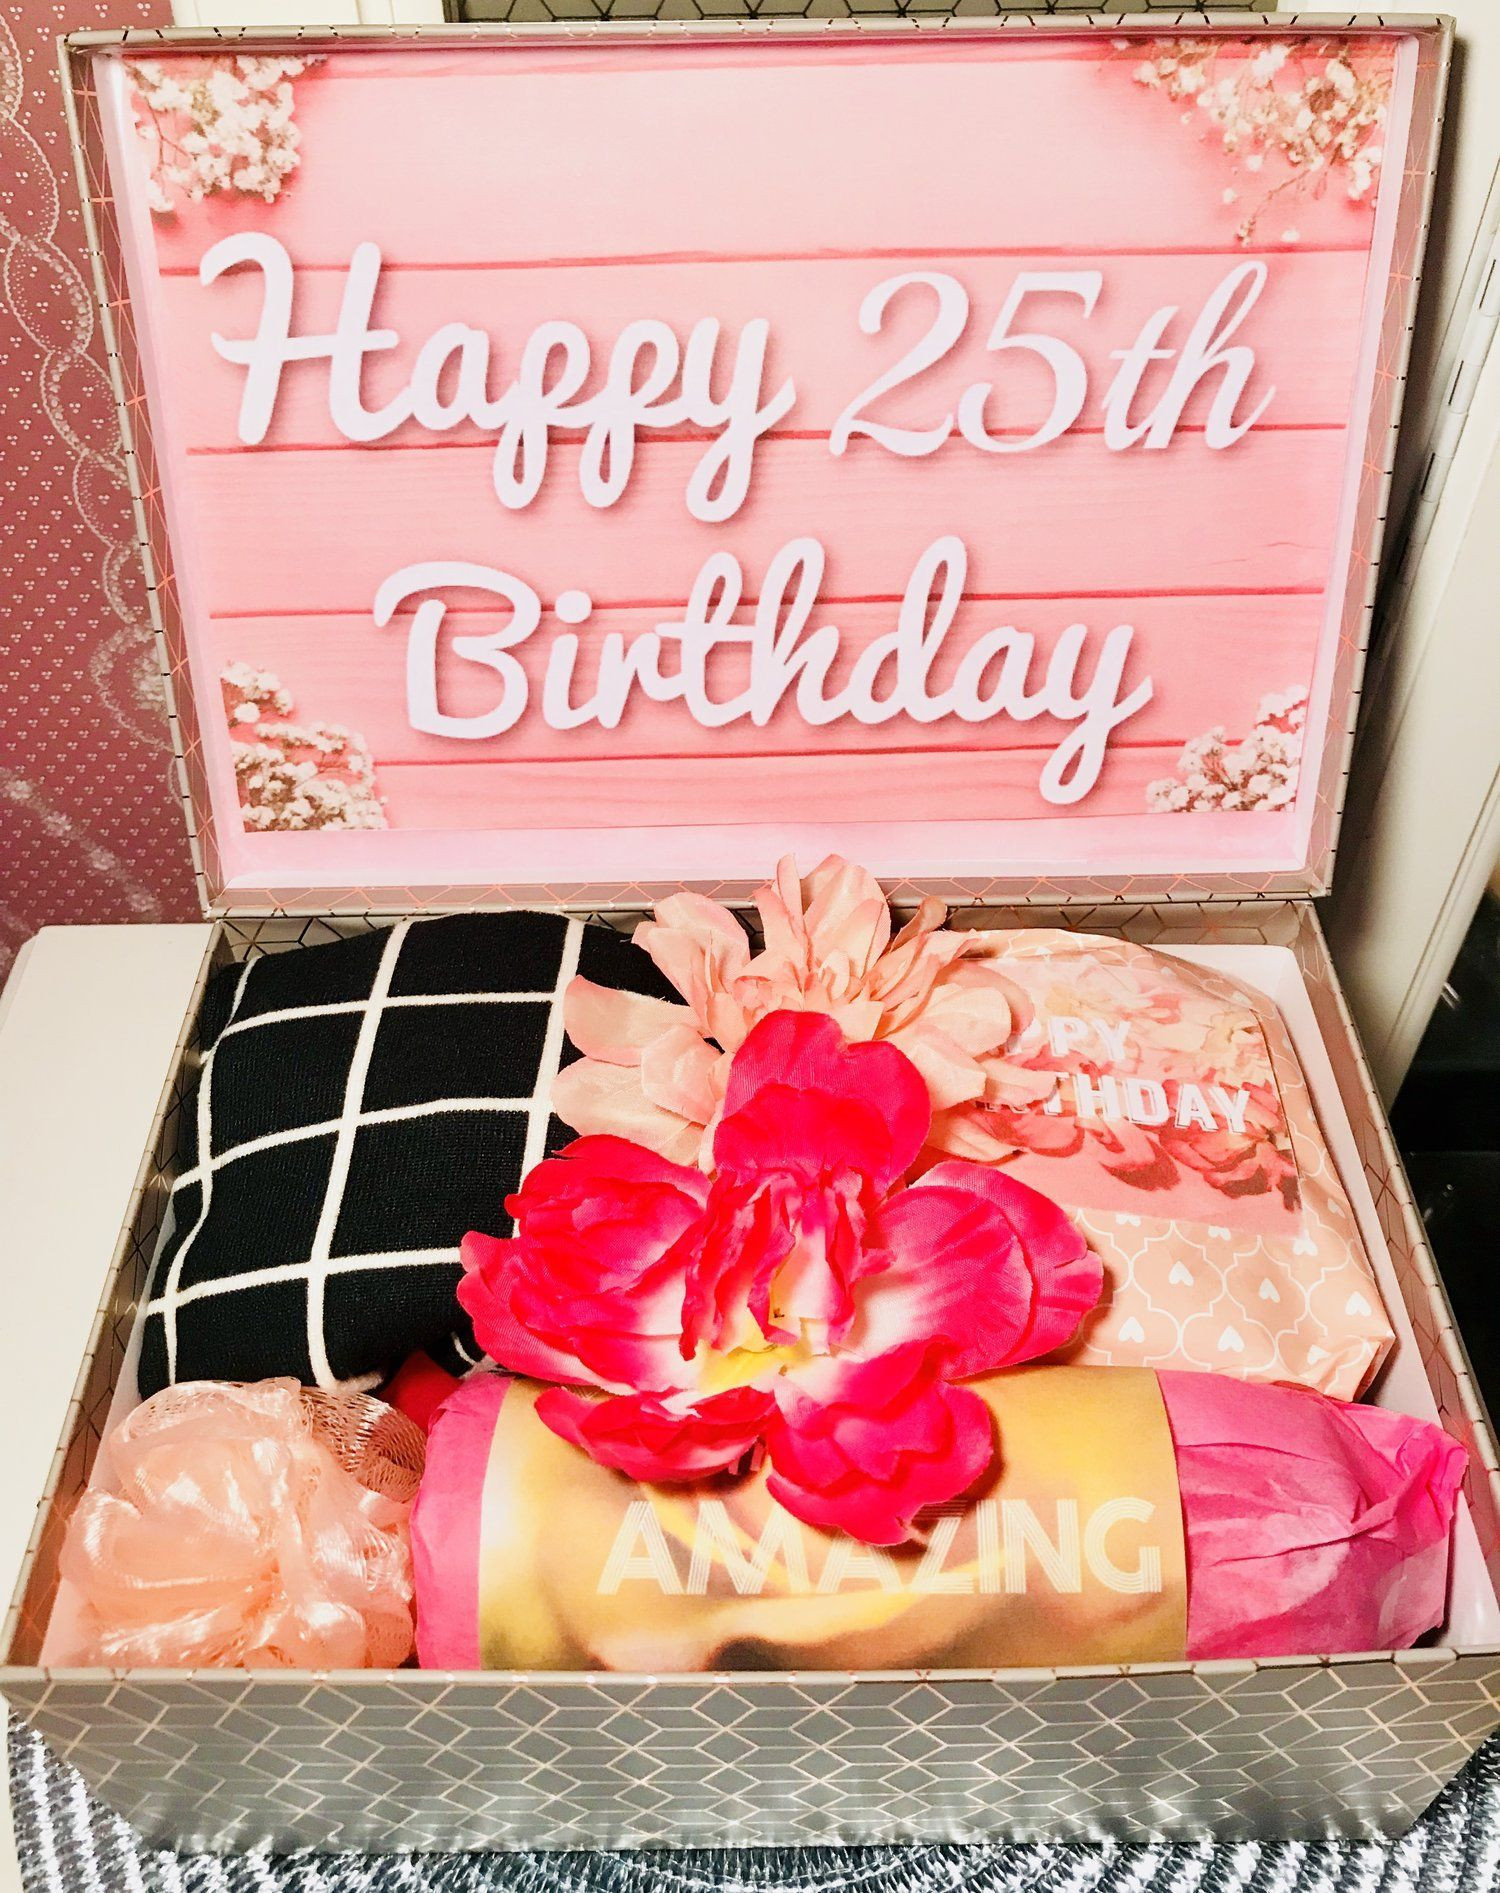 25th Birthday Gift Ideas For Best Friend
 25th Birthday YouAreBeautifulBox Care Package for